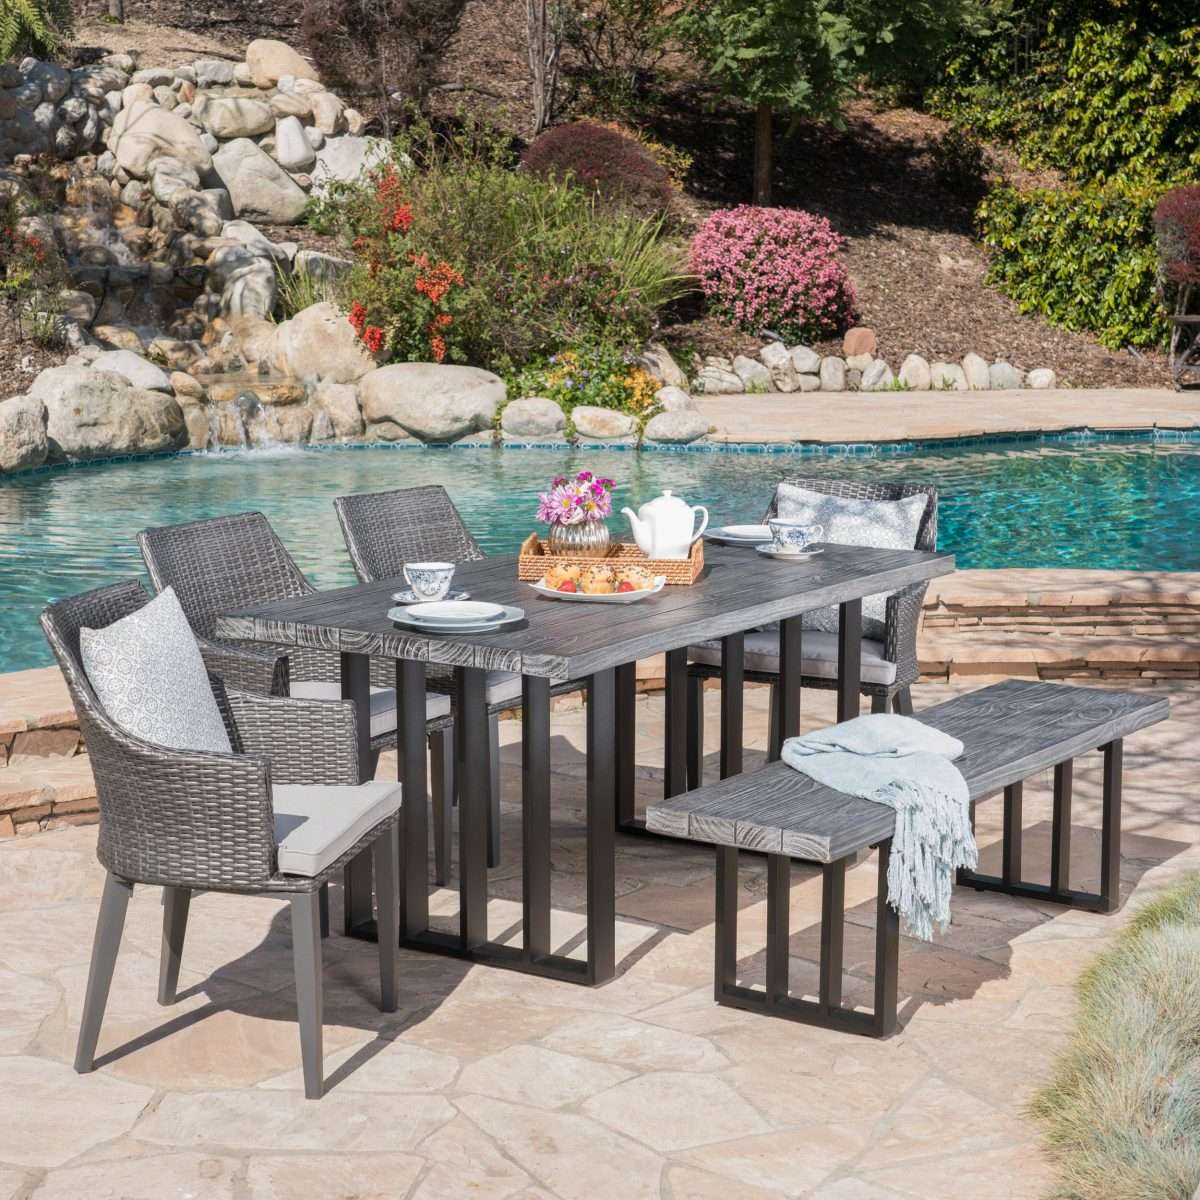 Beatrice Outdoor 6 Piece Wicker Dining Set with Weight Concrete Dining ...